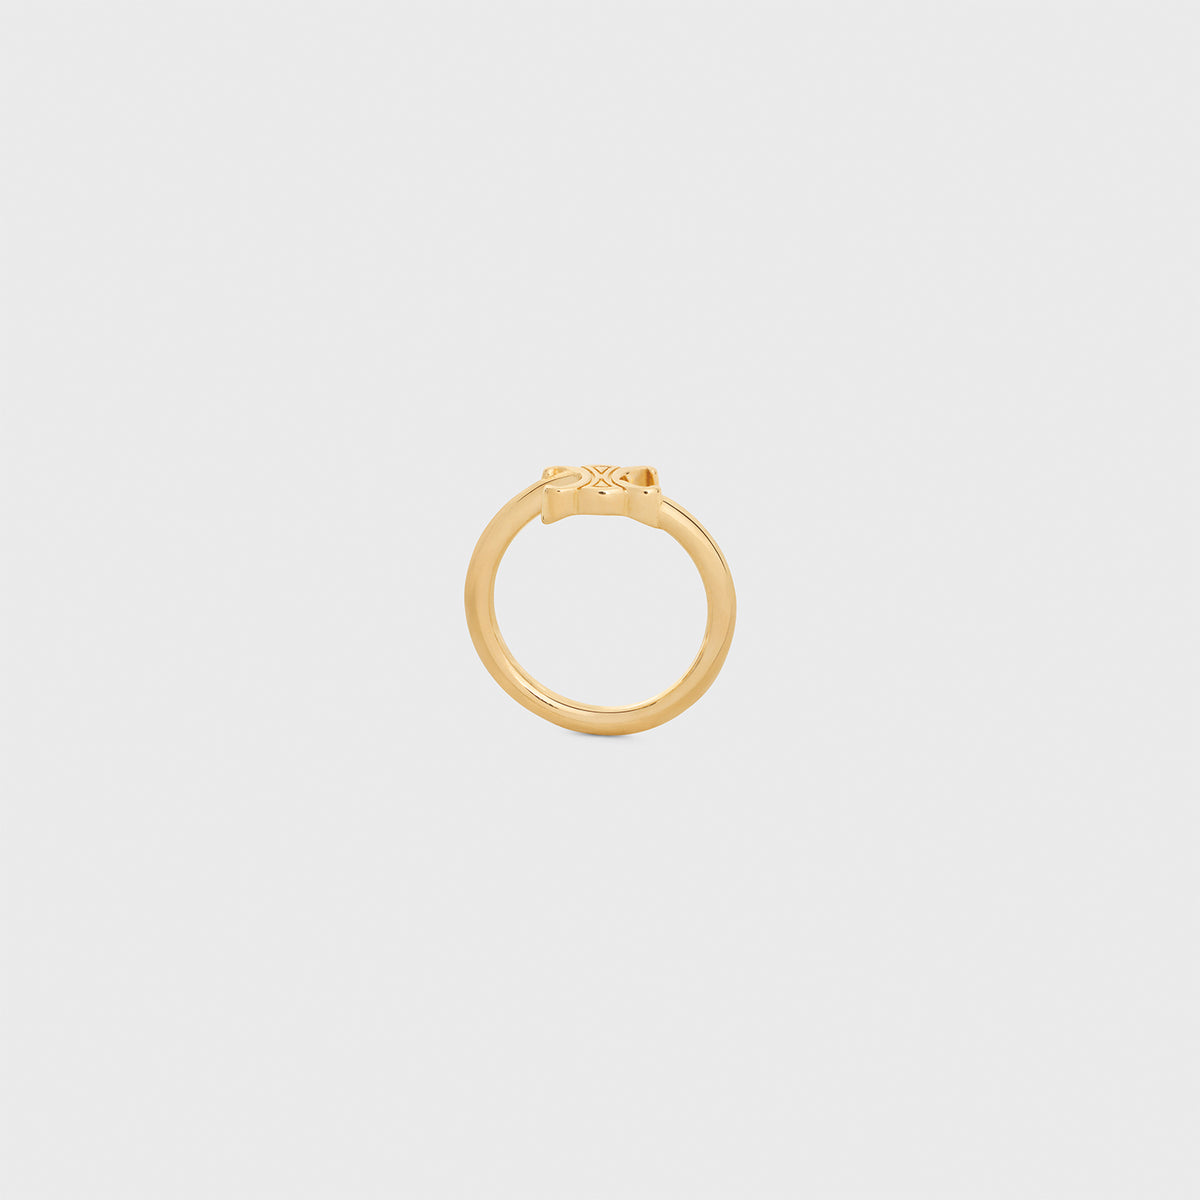 TRIOMPHE ASYMMETRIC RING IN BRASS WITH GOLD FINISH